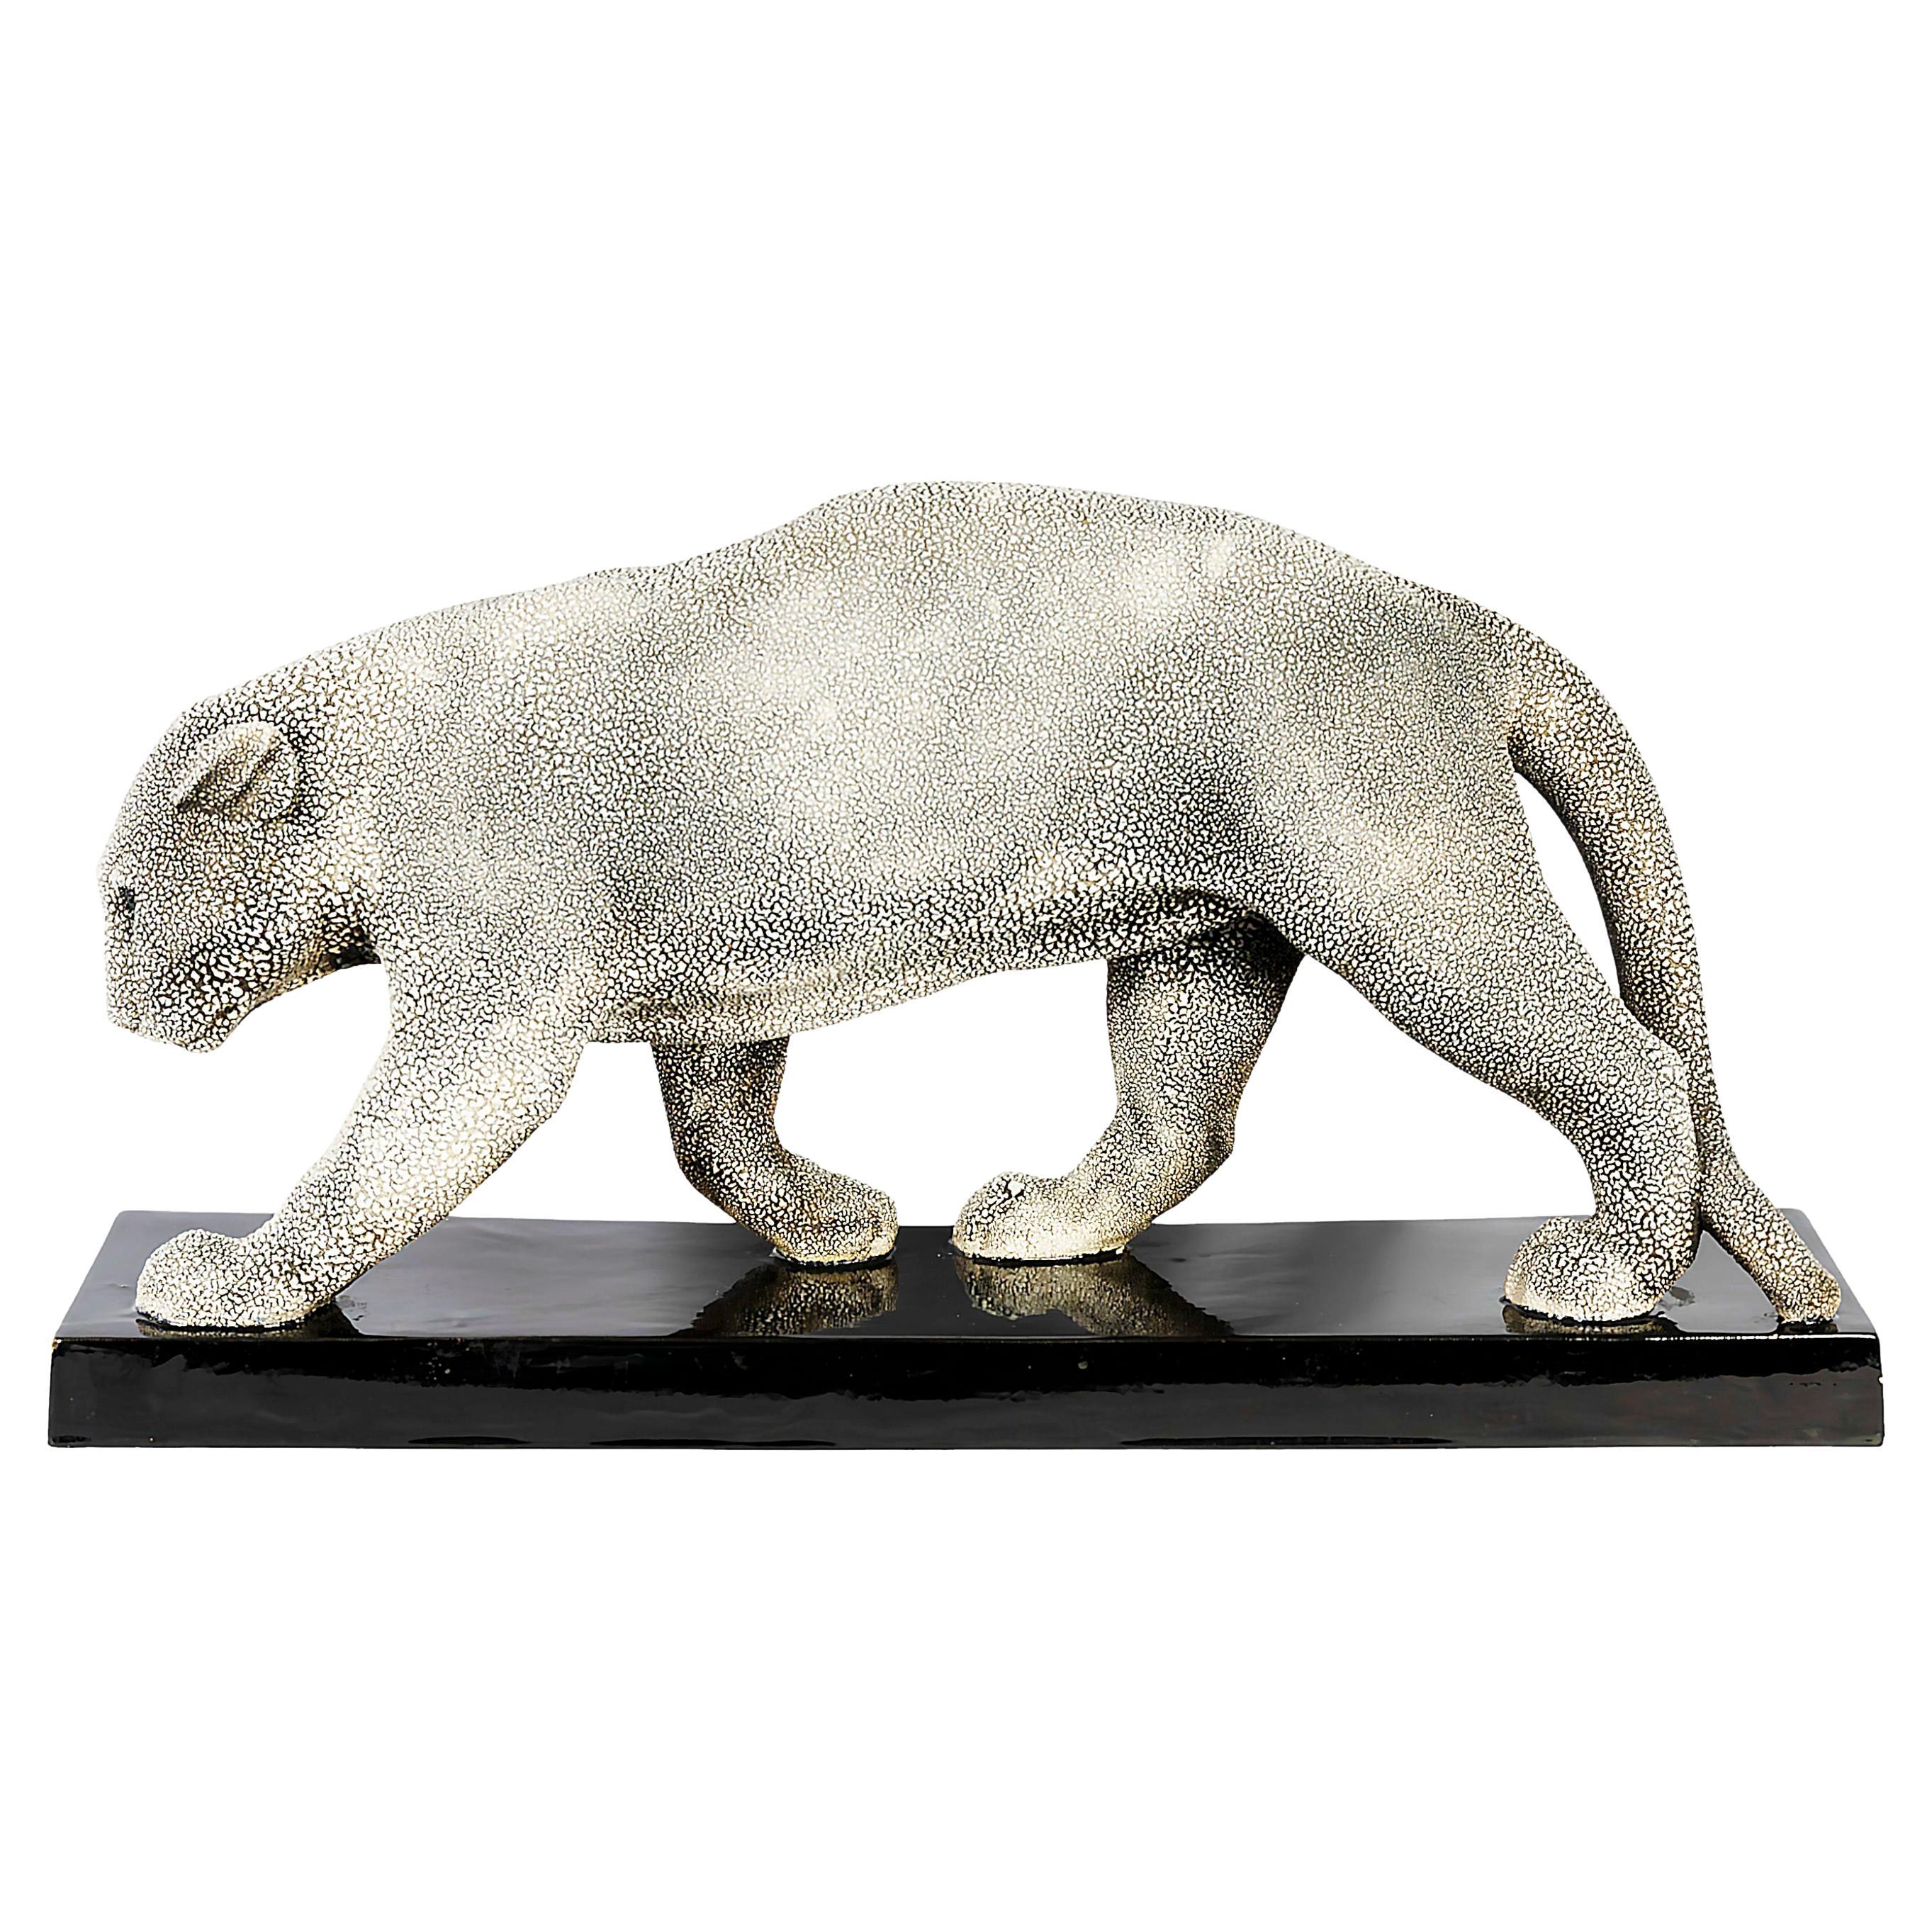 French Art Deco period hand crafted sculpture of a sneaking panther with textured surface on black colour base by Gabriel Beauvais for Edition Kaza.
Edition Kaza is known about there quality ceramics, made by artists created during the Art Deco